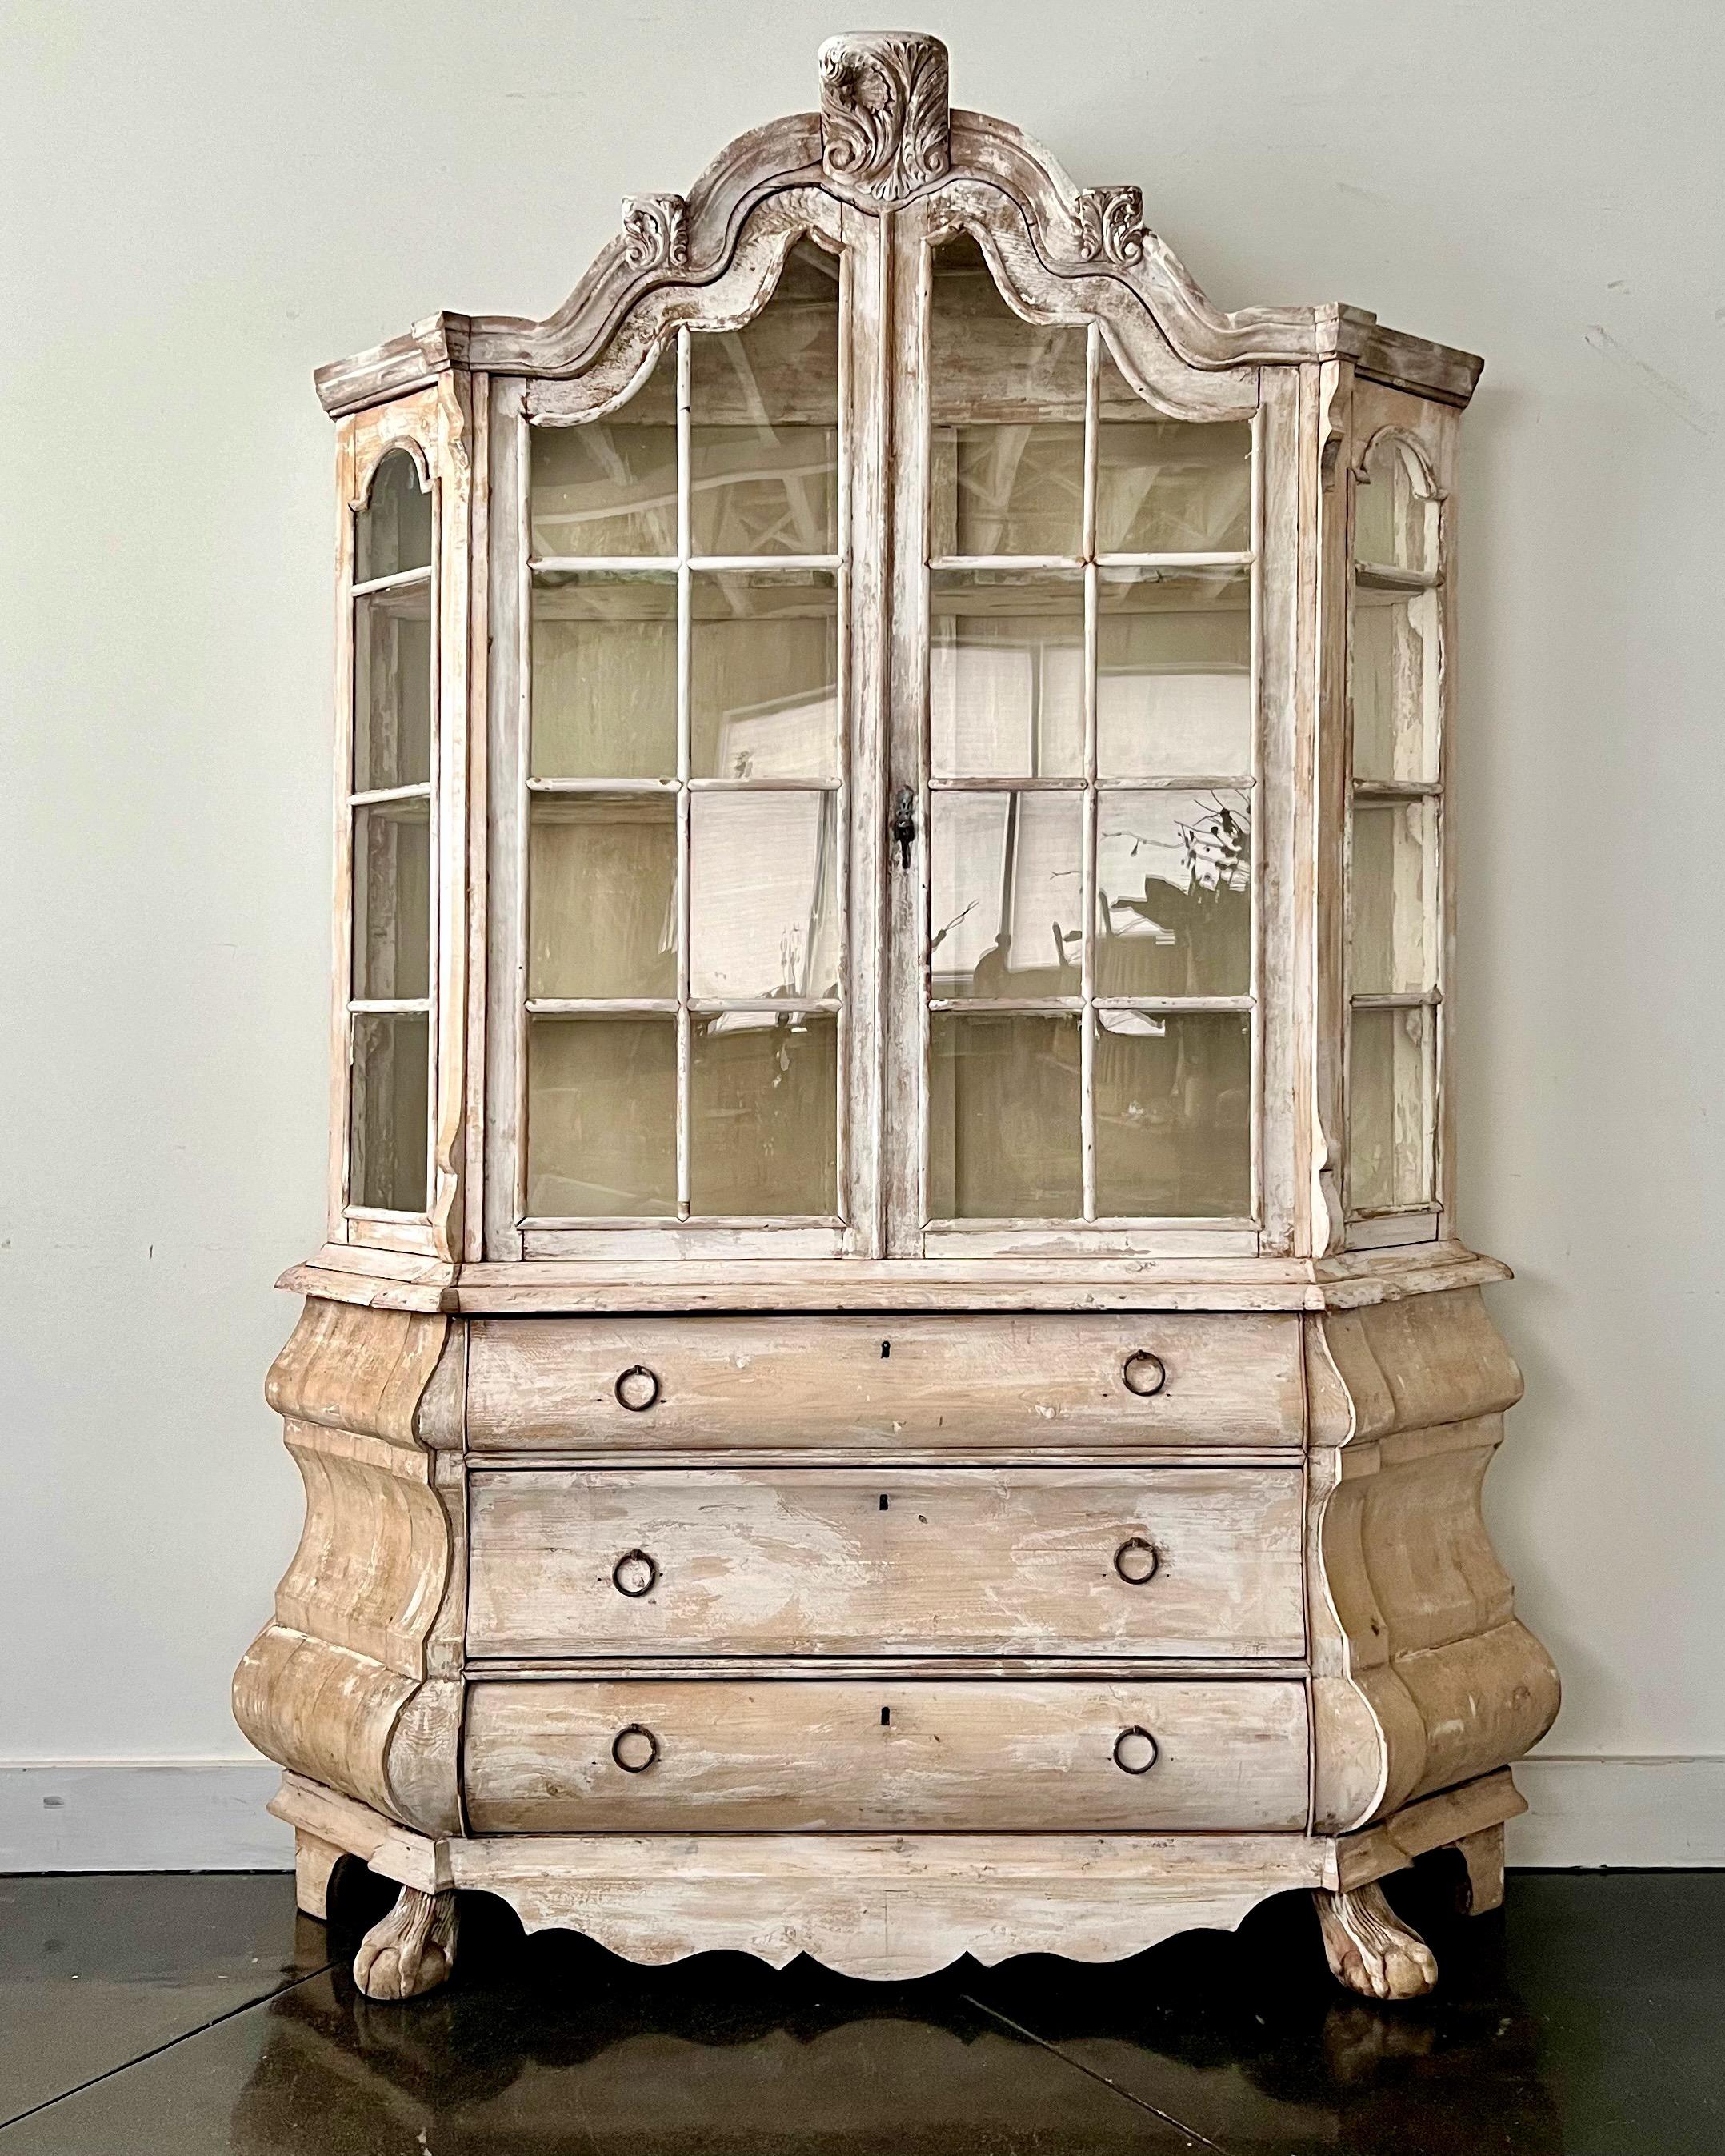 A very elegant 19th century Dutch cabinet vitrine in impressive scale with richly carved crest with acanthus leaves, and scrolls., scraped to its most original patinated color, beautifully shaped/scalloped interior shelve, arched pediment cornice